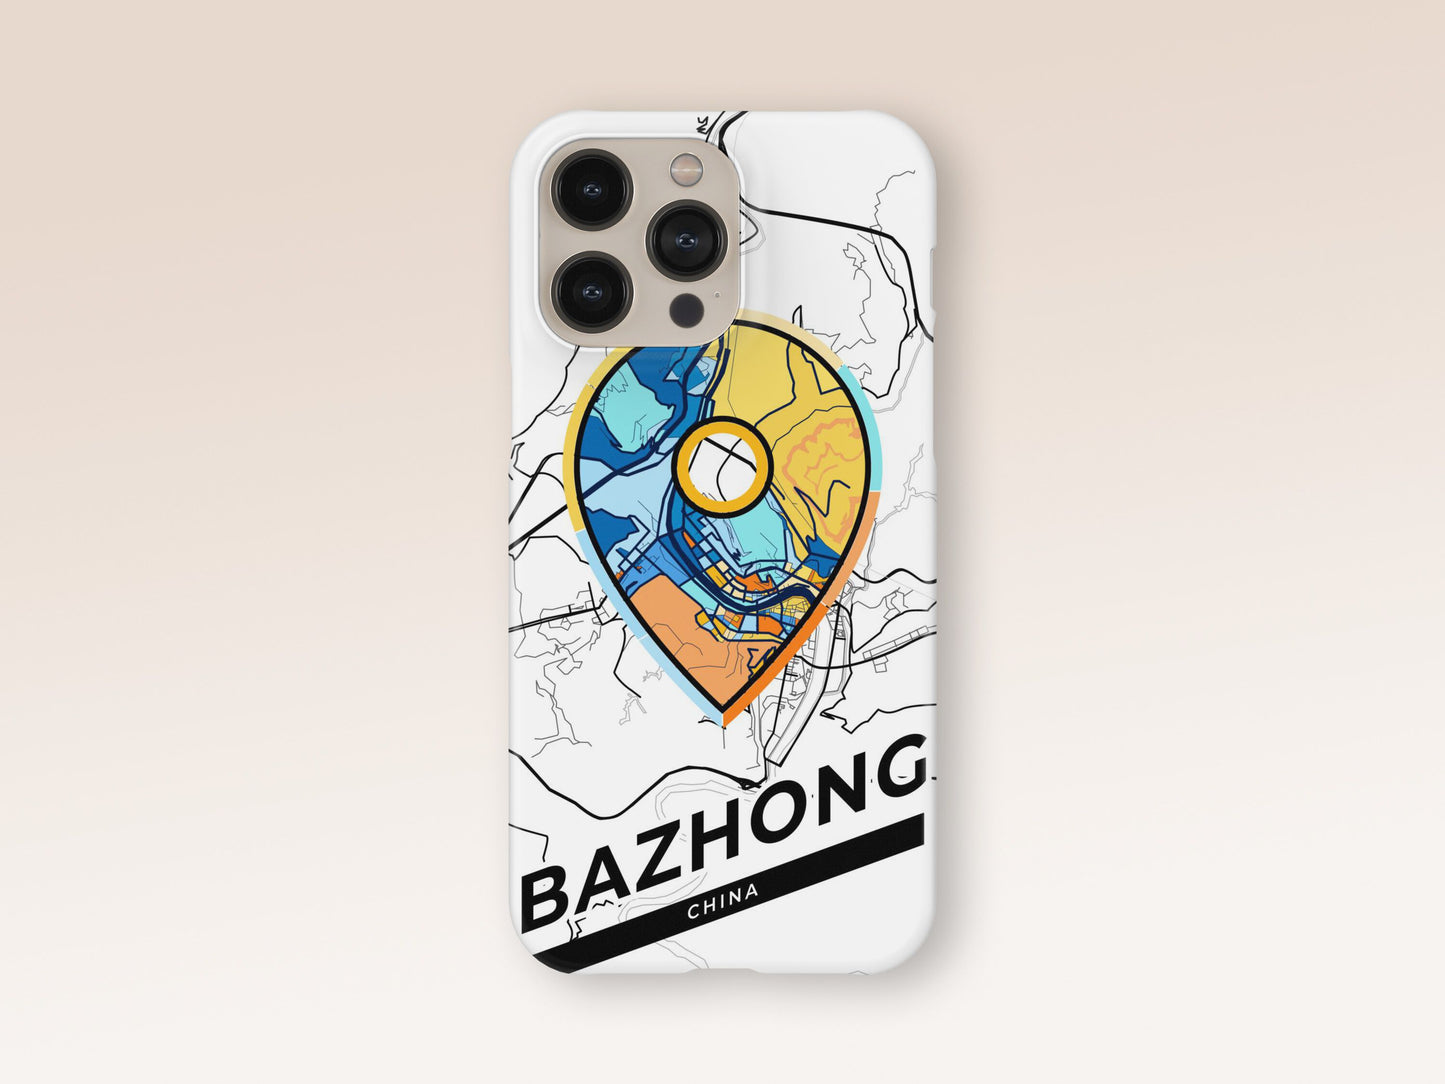 Bazhong China slim phone case with colorful icon. Birthday, wedding or housewarming gift. Couple match cases. 1